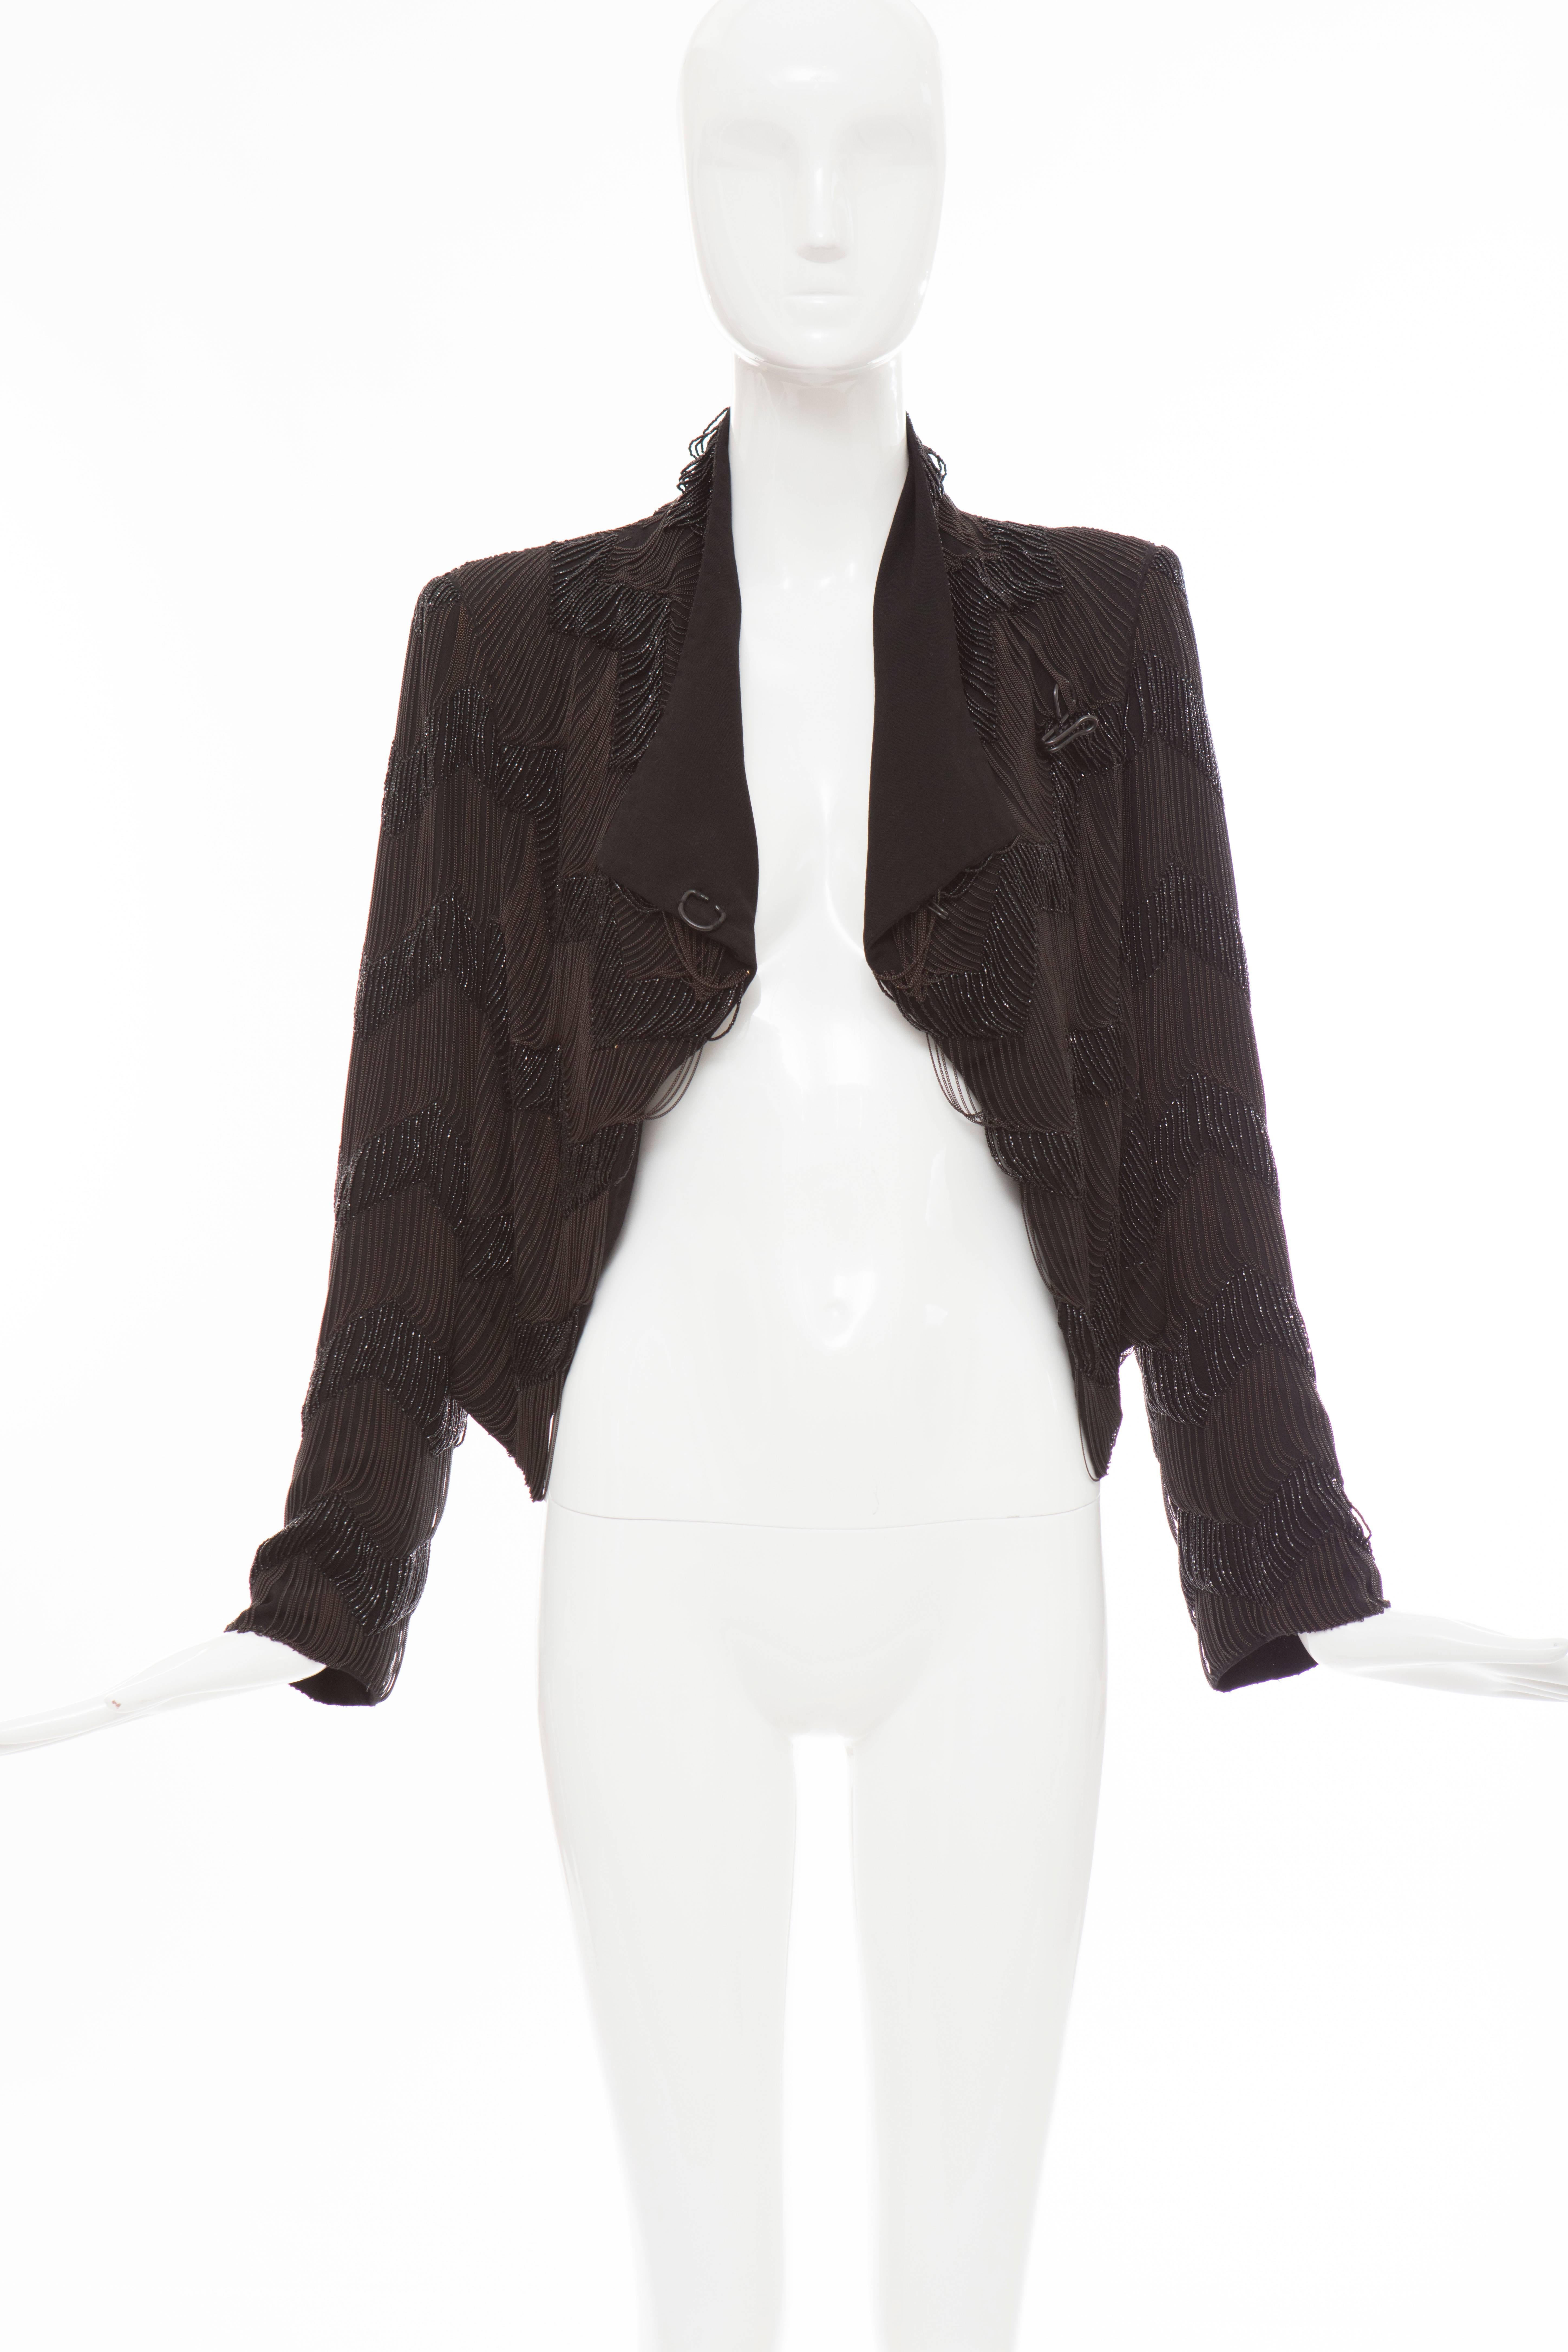 Ann Demeulemeester Runway Black Wool Chain And Beaded Jacket, Fall 2011 For Sale 4